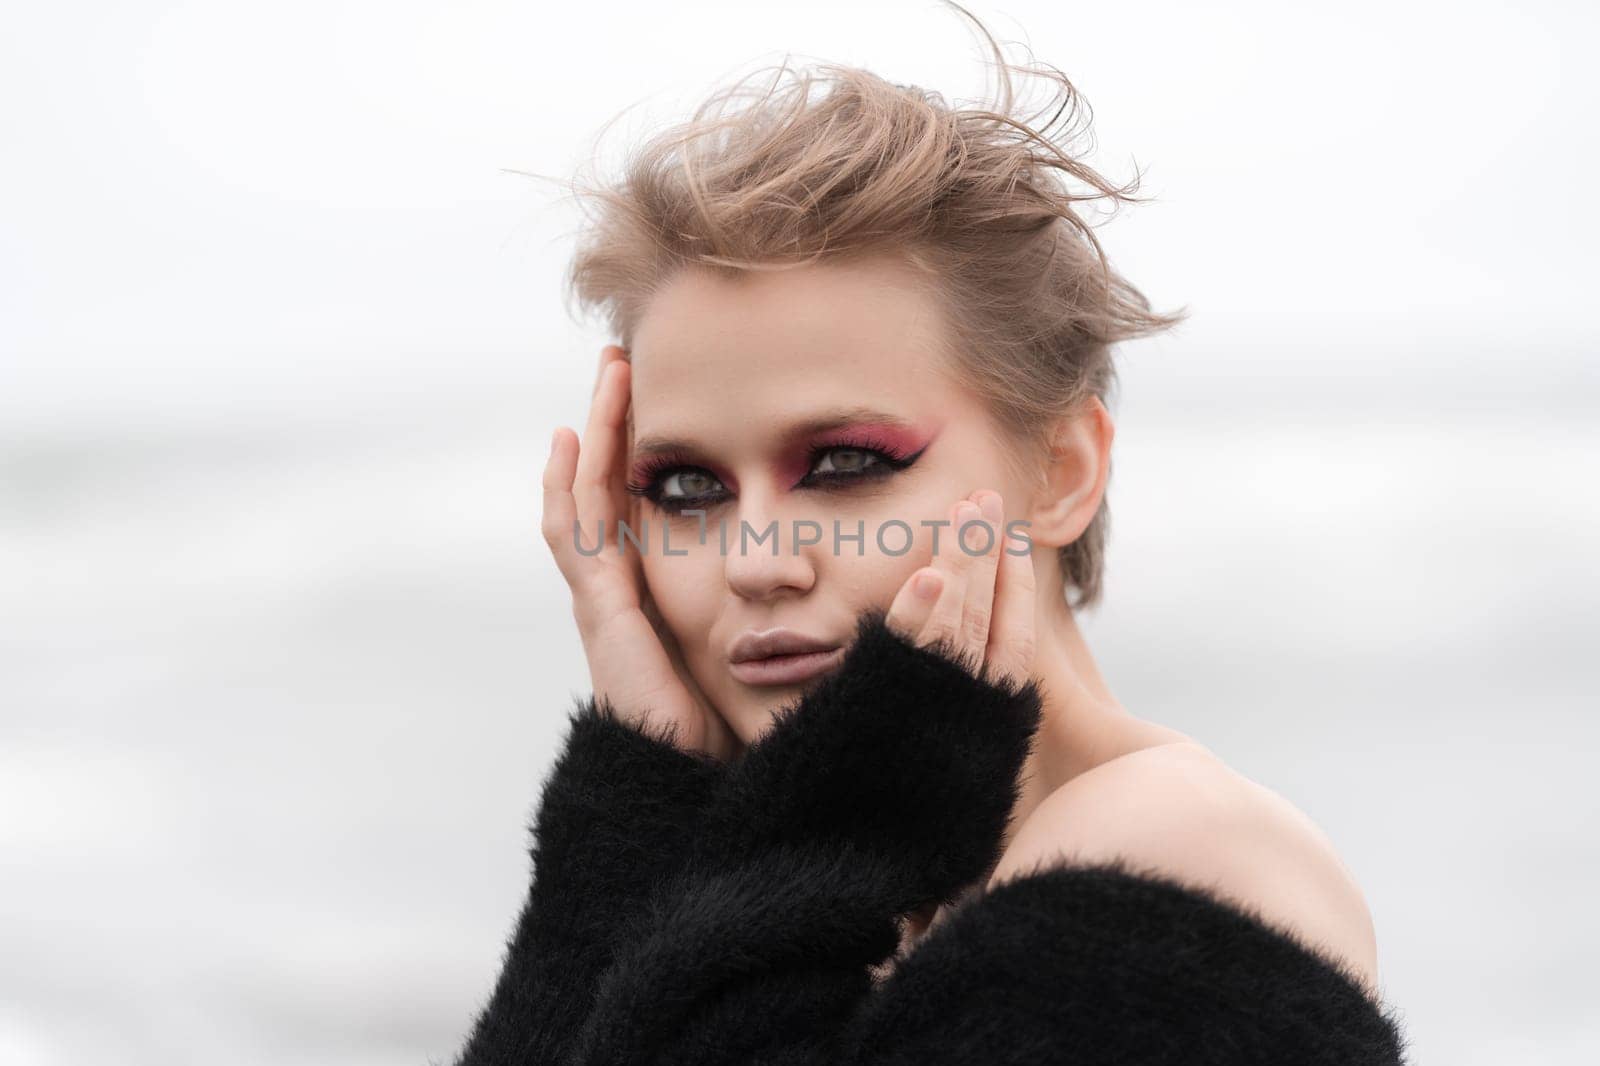 Blonde woman posing outside on white natural background and bright makeup really makes her stand out by Alexander-Piragis